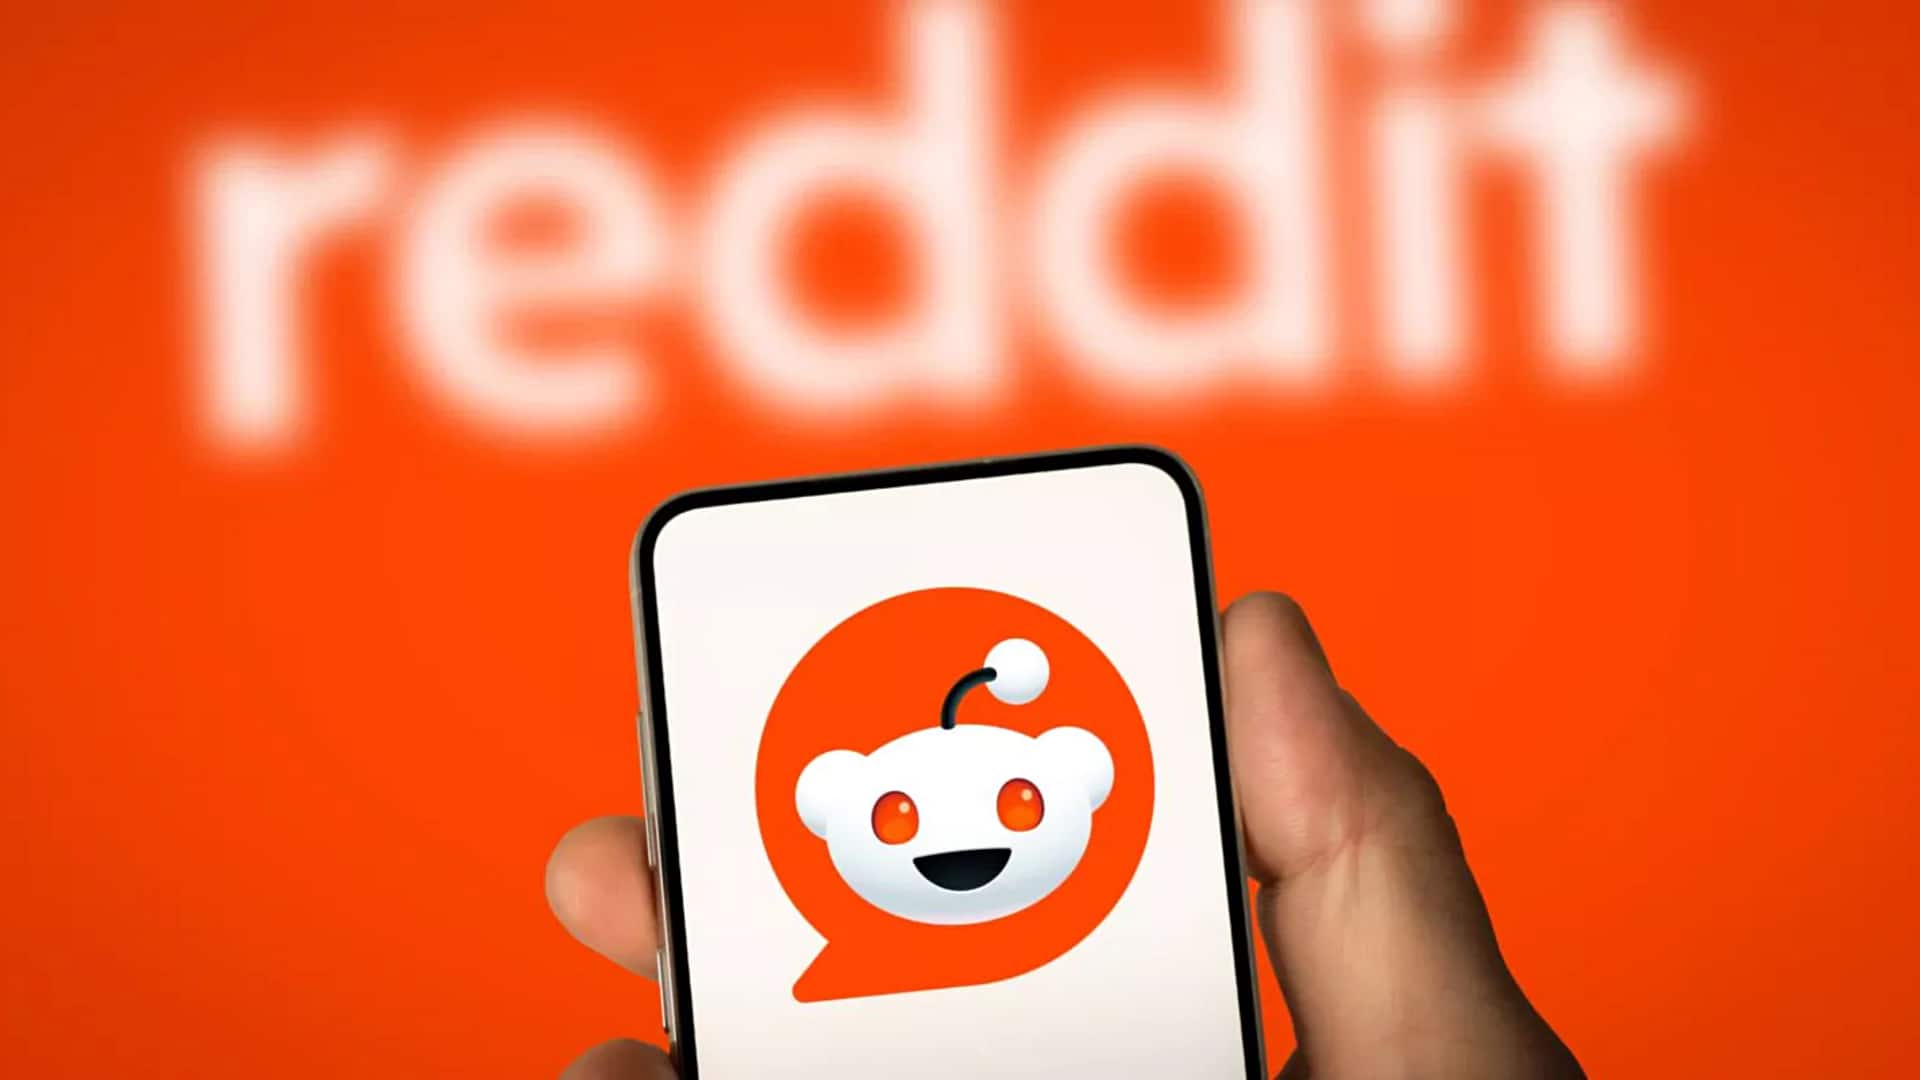 Reddit inks $60M content licensing deal with AI company: Report